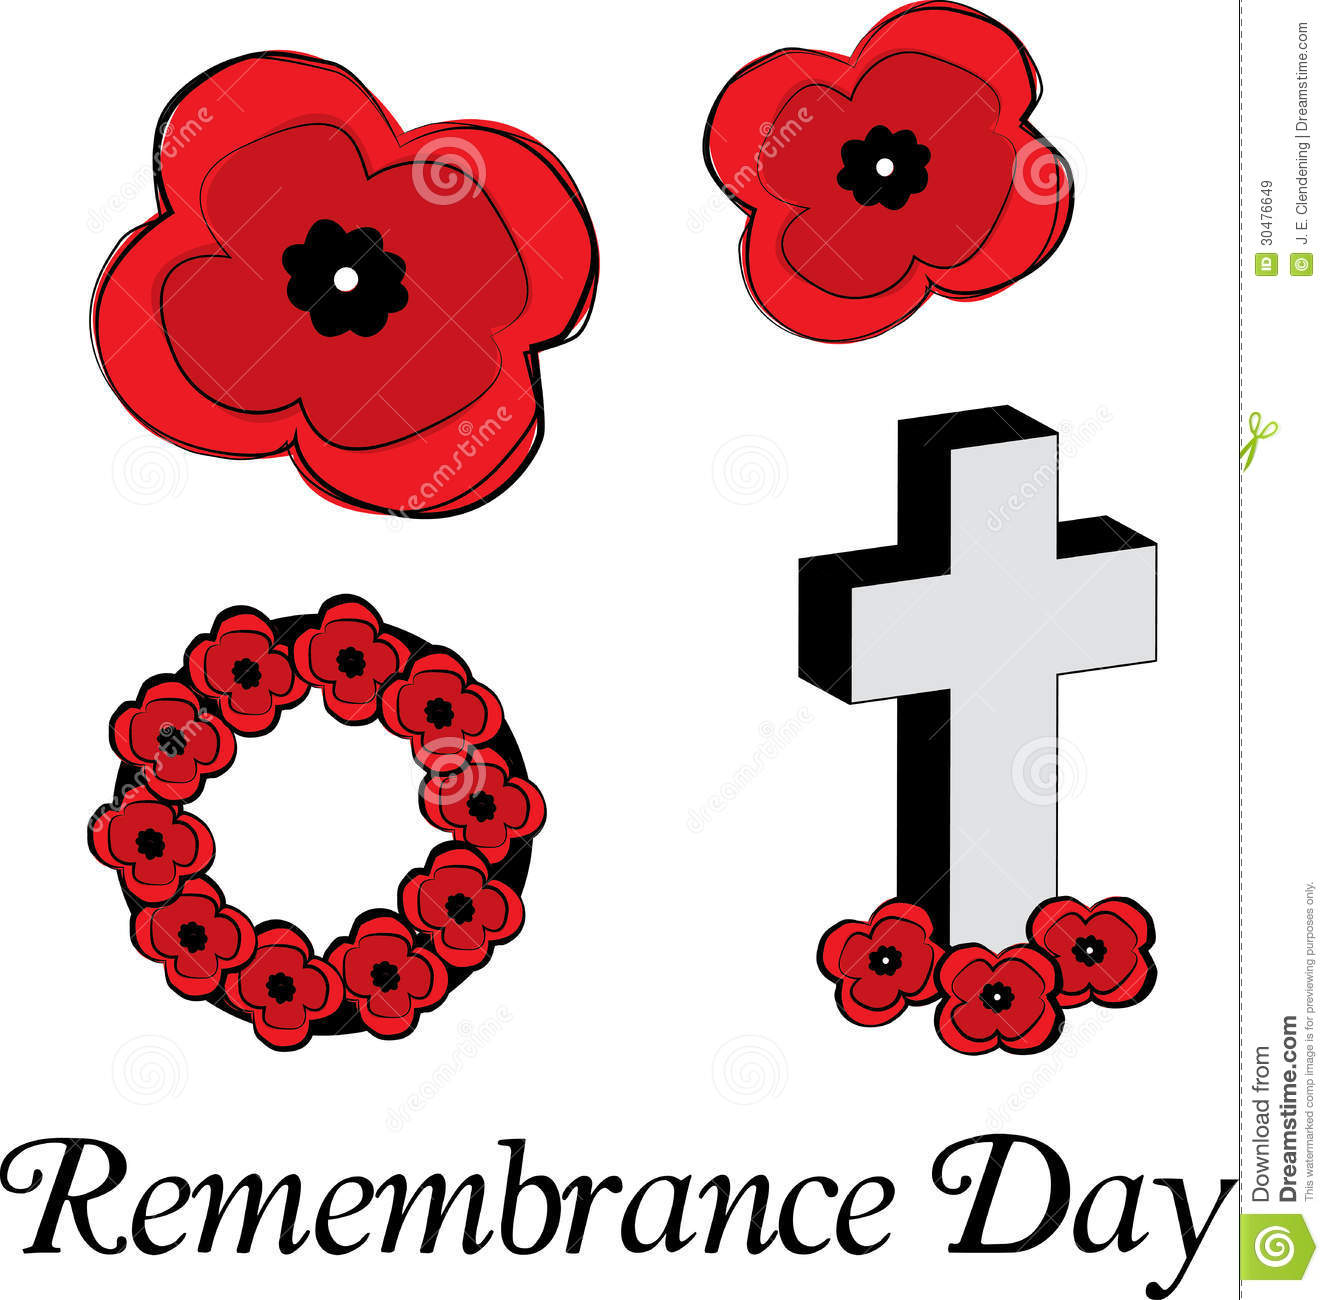 Remembrance Day Poppy Clipart Remembrance Day Poppies Royalty Free